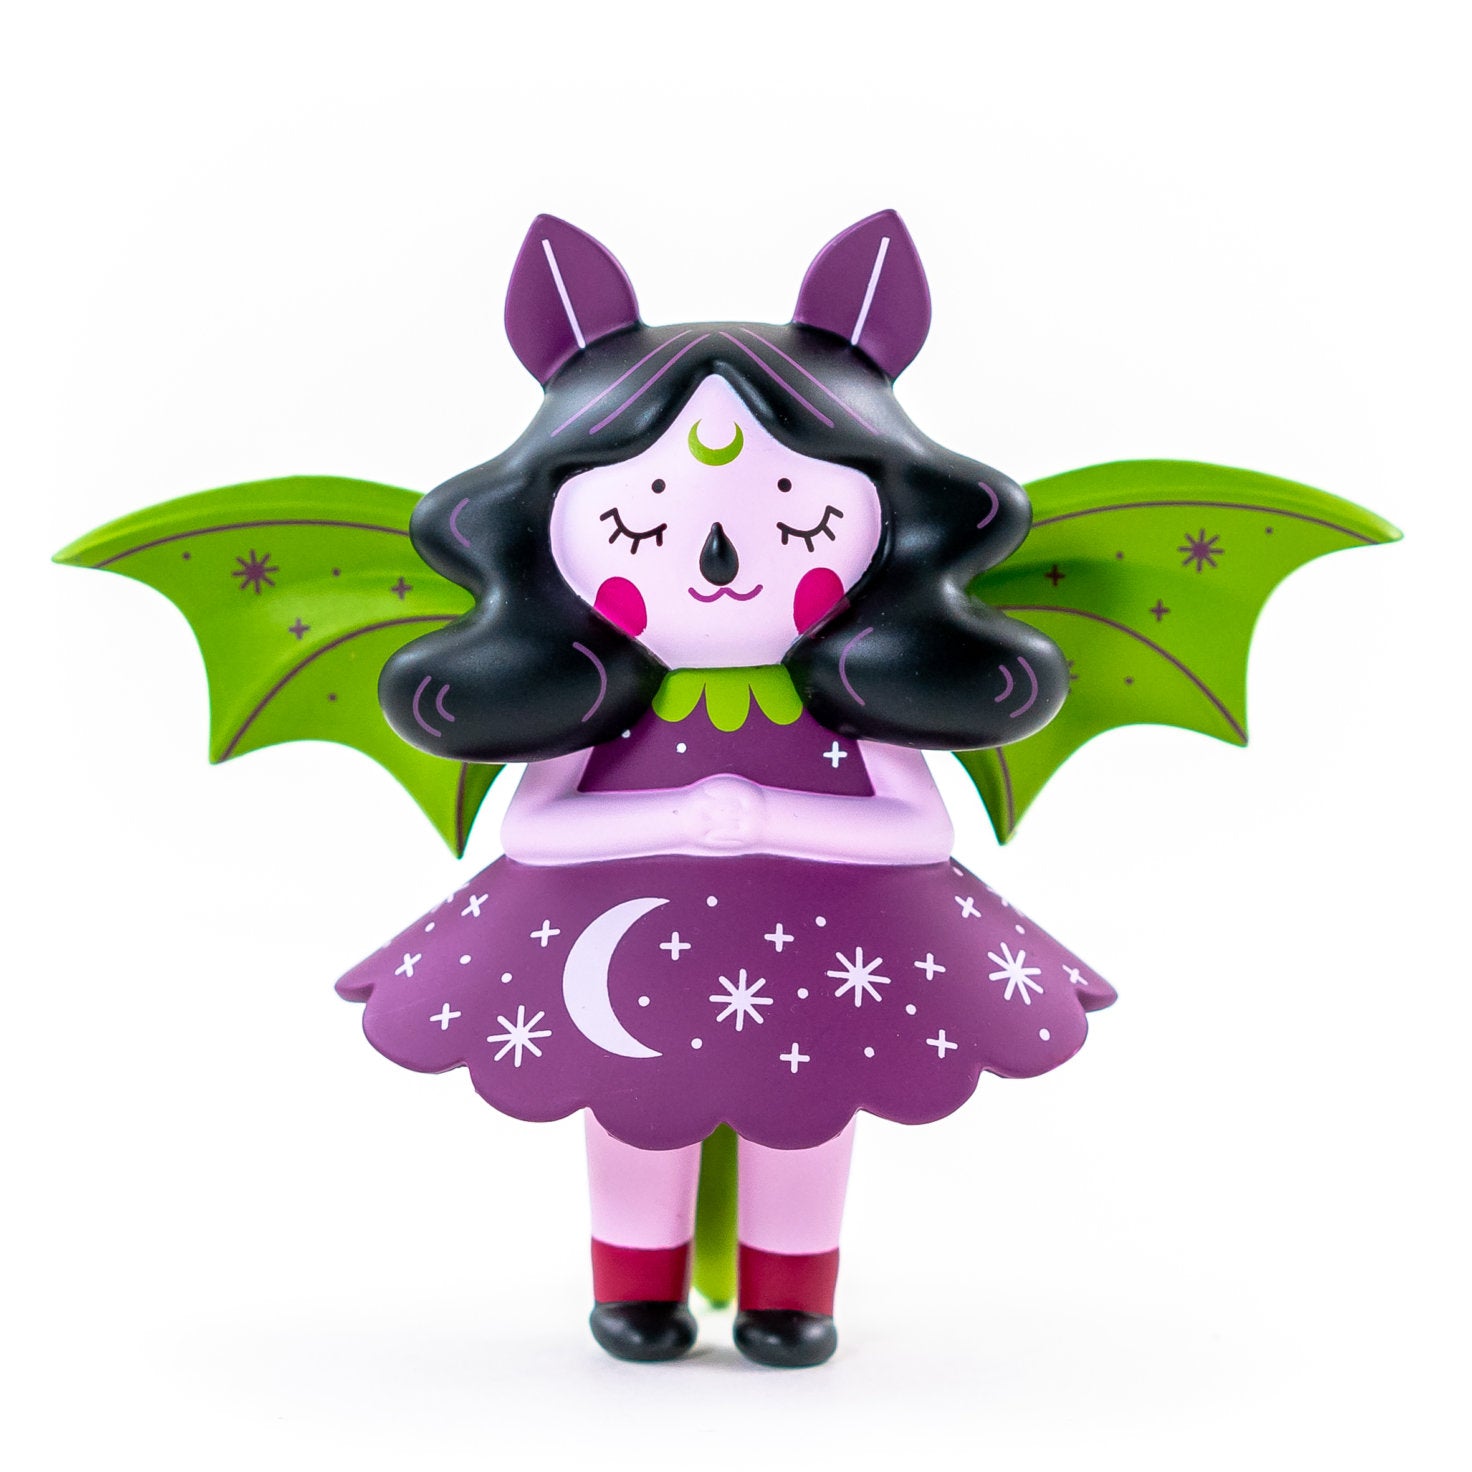 Midnight-Moon-Bat-by-Nightly-Made-Megan-x-Martian-Toys-The-Toy-Chronicle-2019-frwr-1472x1472